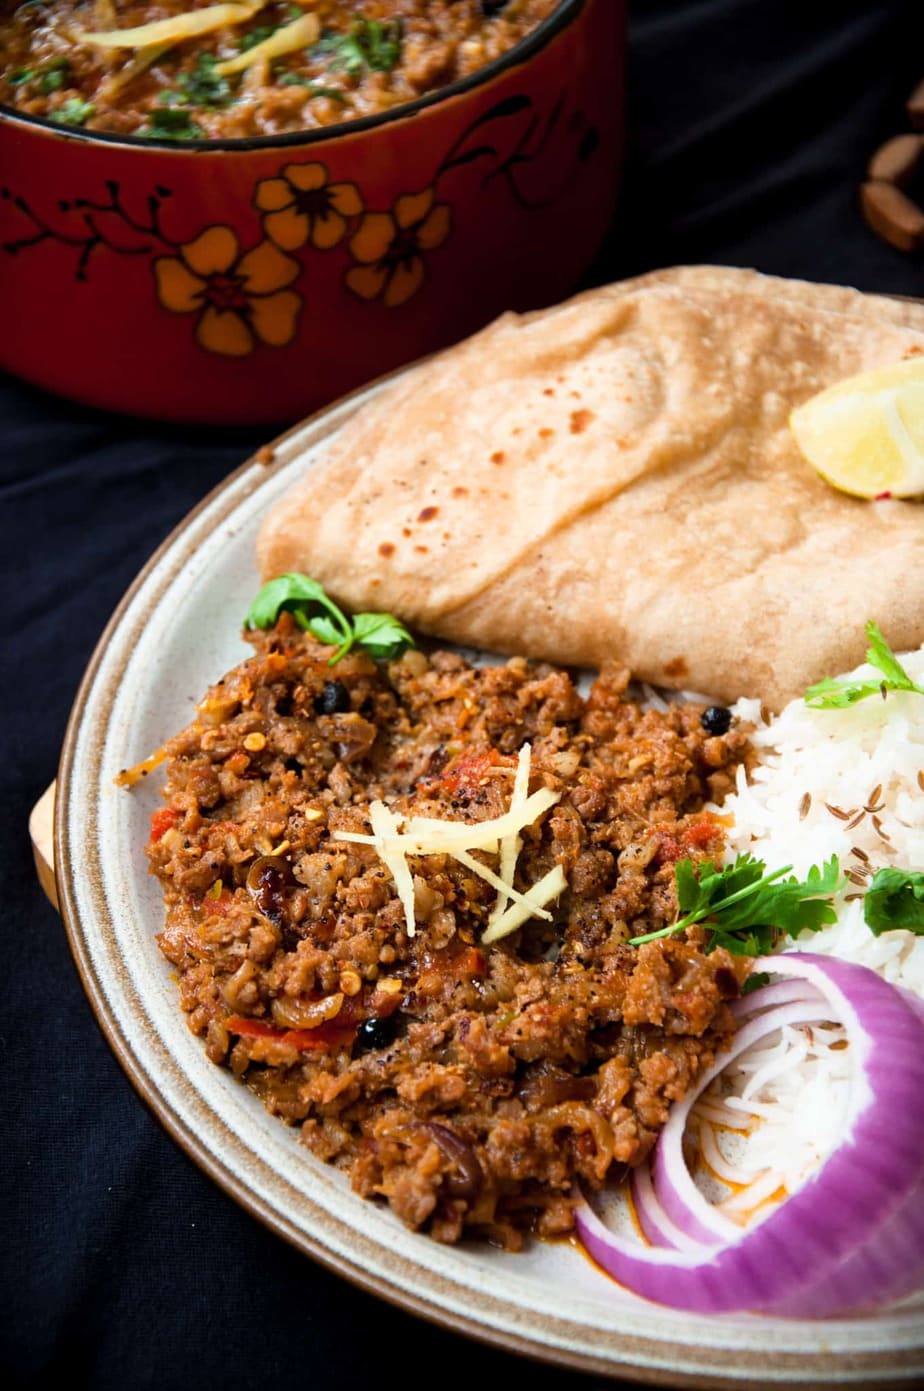 Keema served in a plate with onion slices, roti and rice. Ginger is used to garnish.